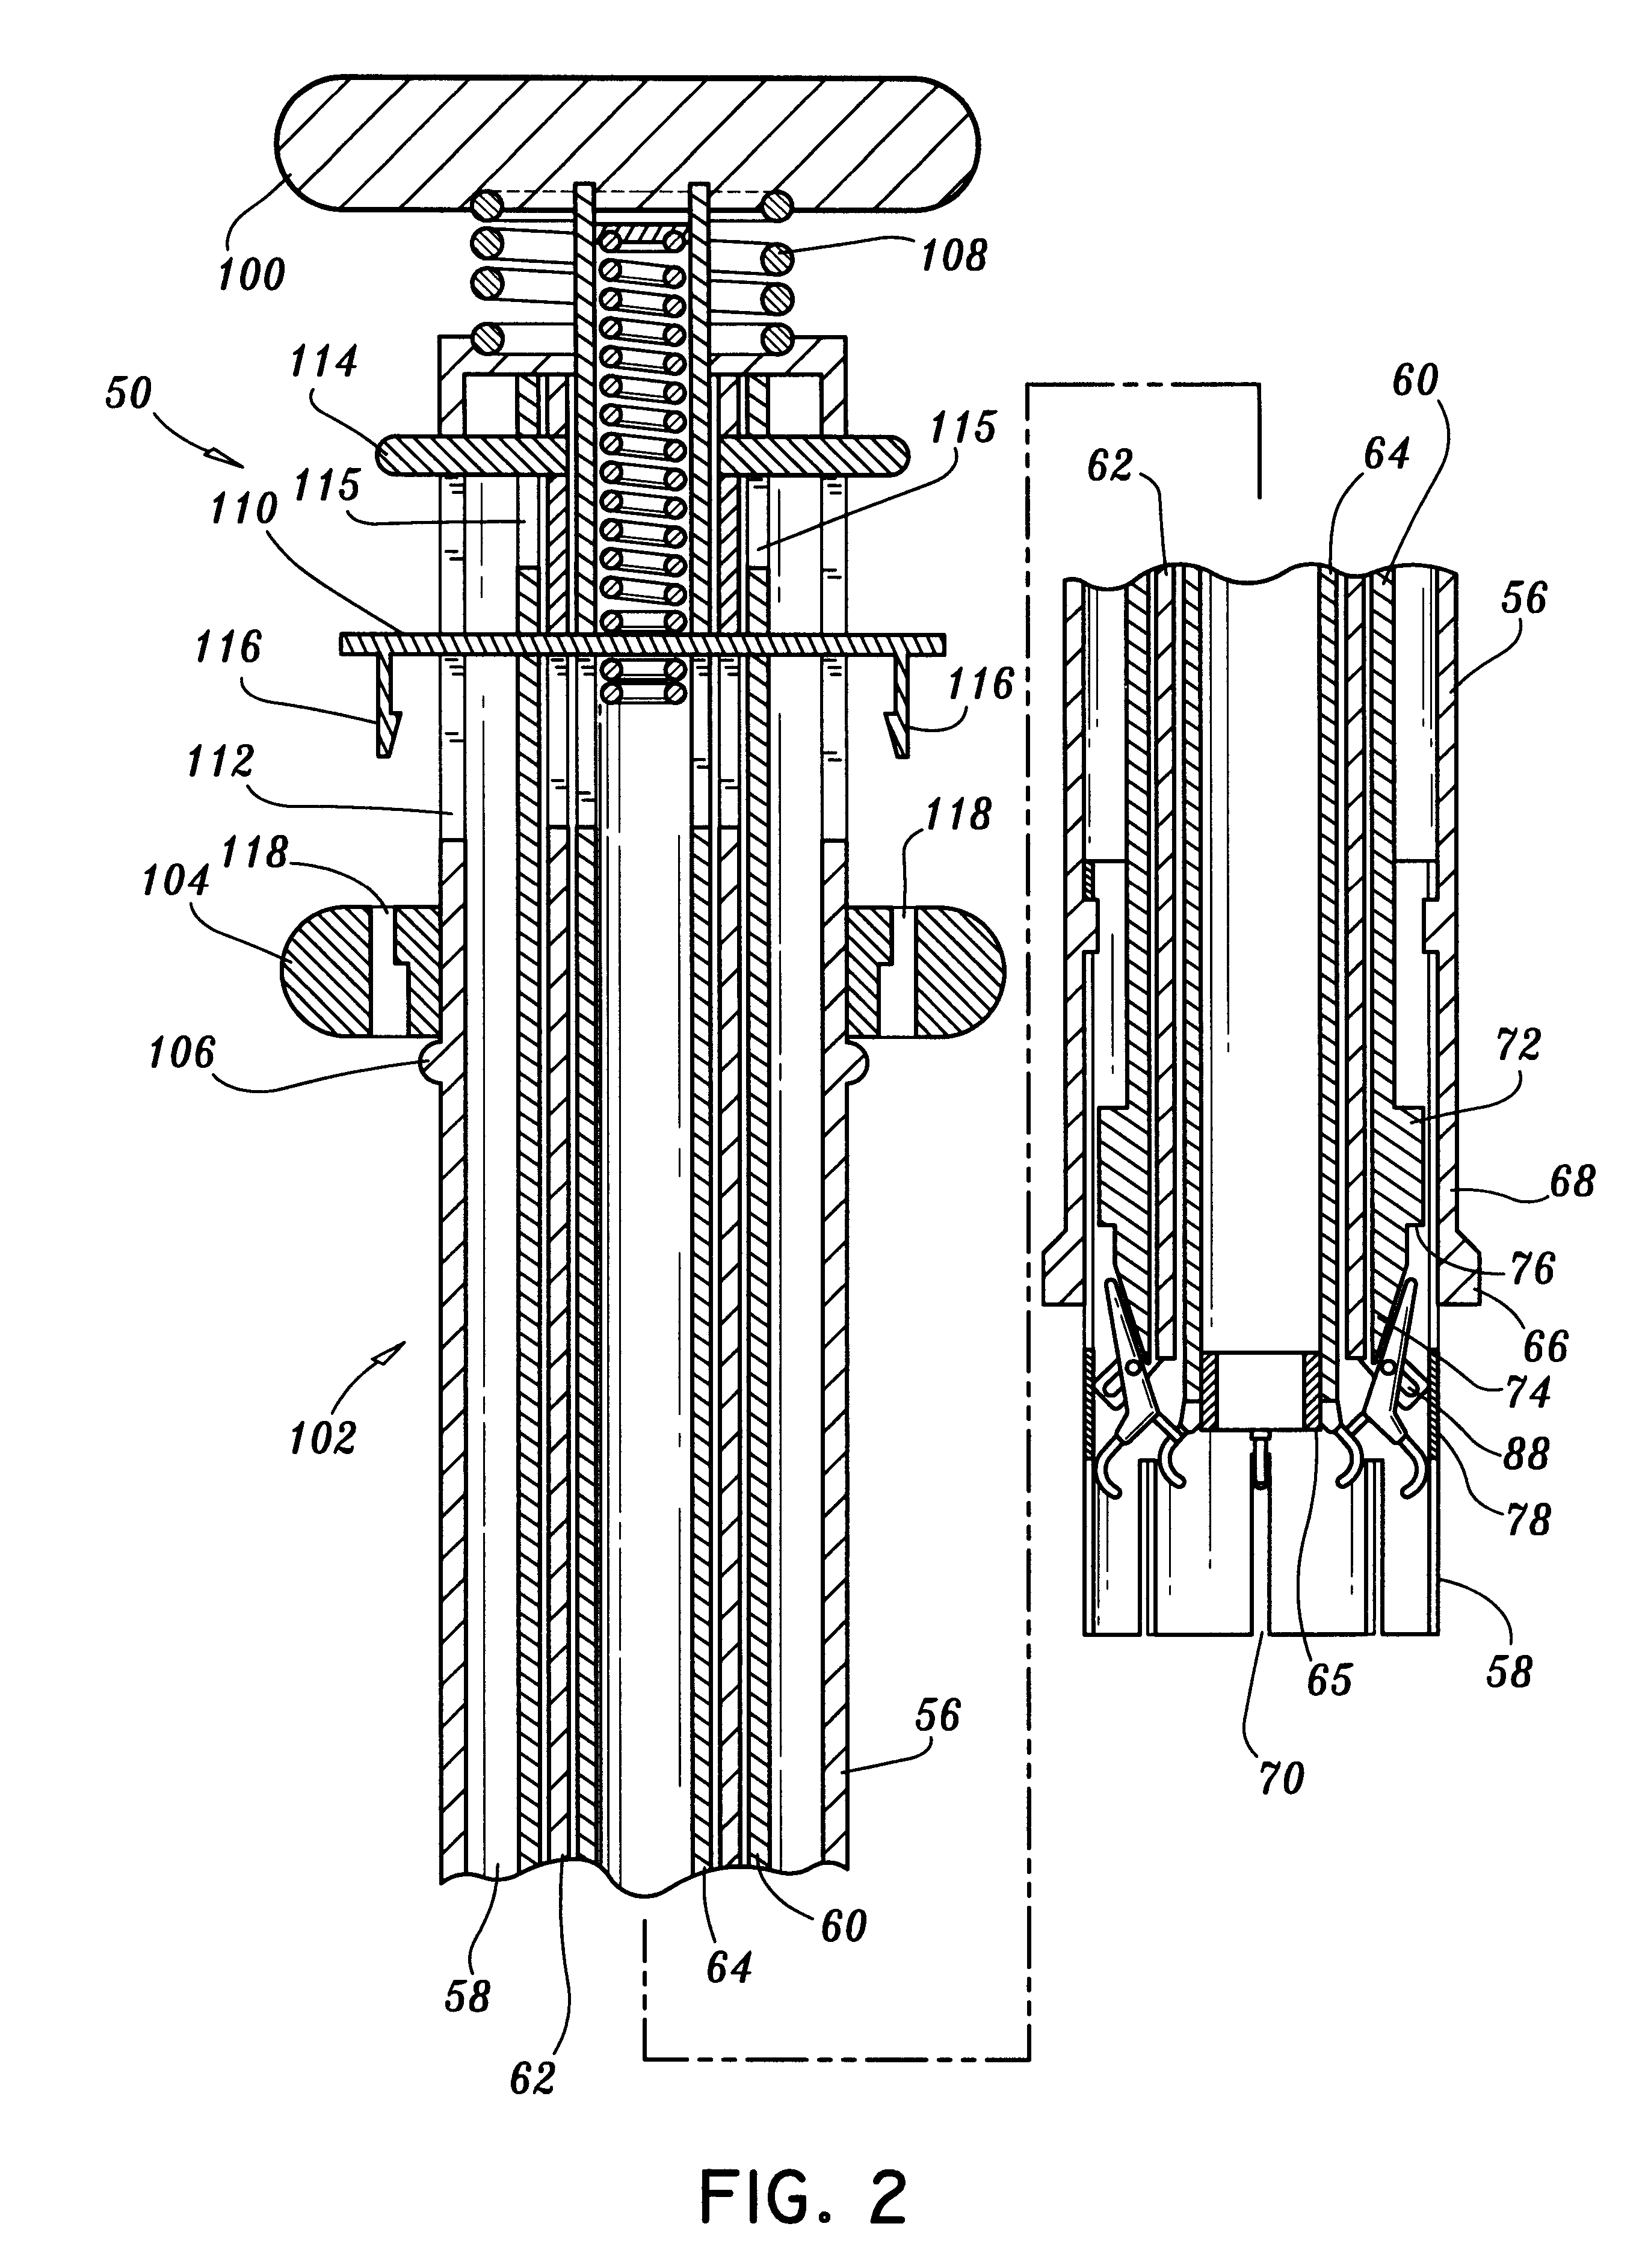 Stapling apparatus and method for heart valve replacement